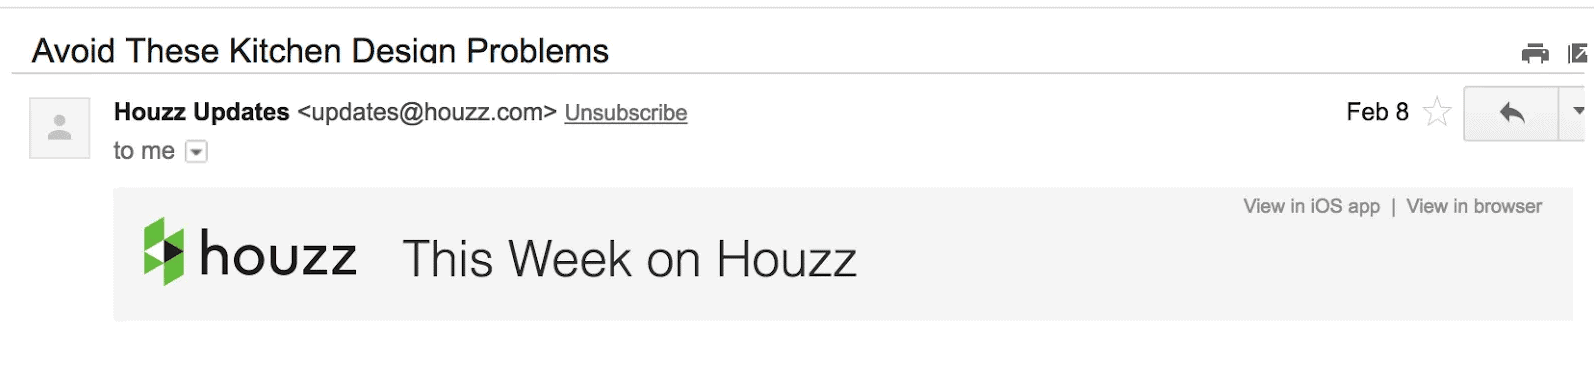 Best Email Subject Lines: Screenshot of email from Houzz